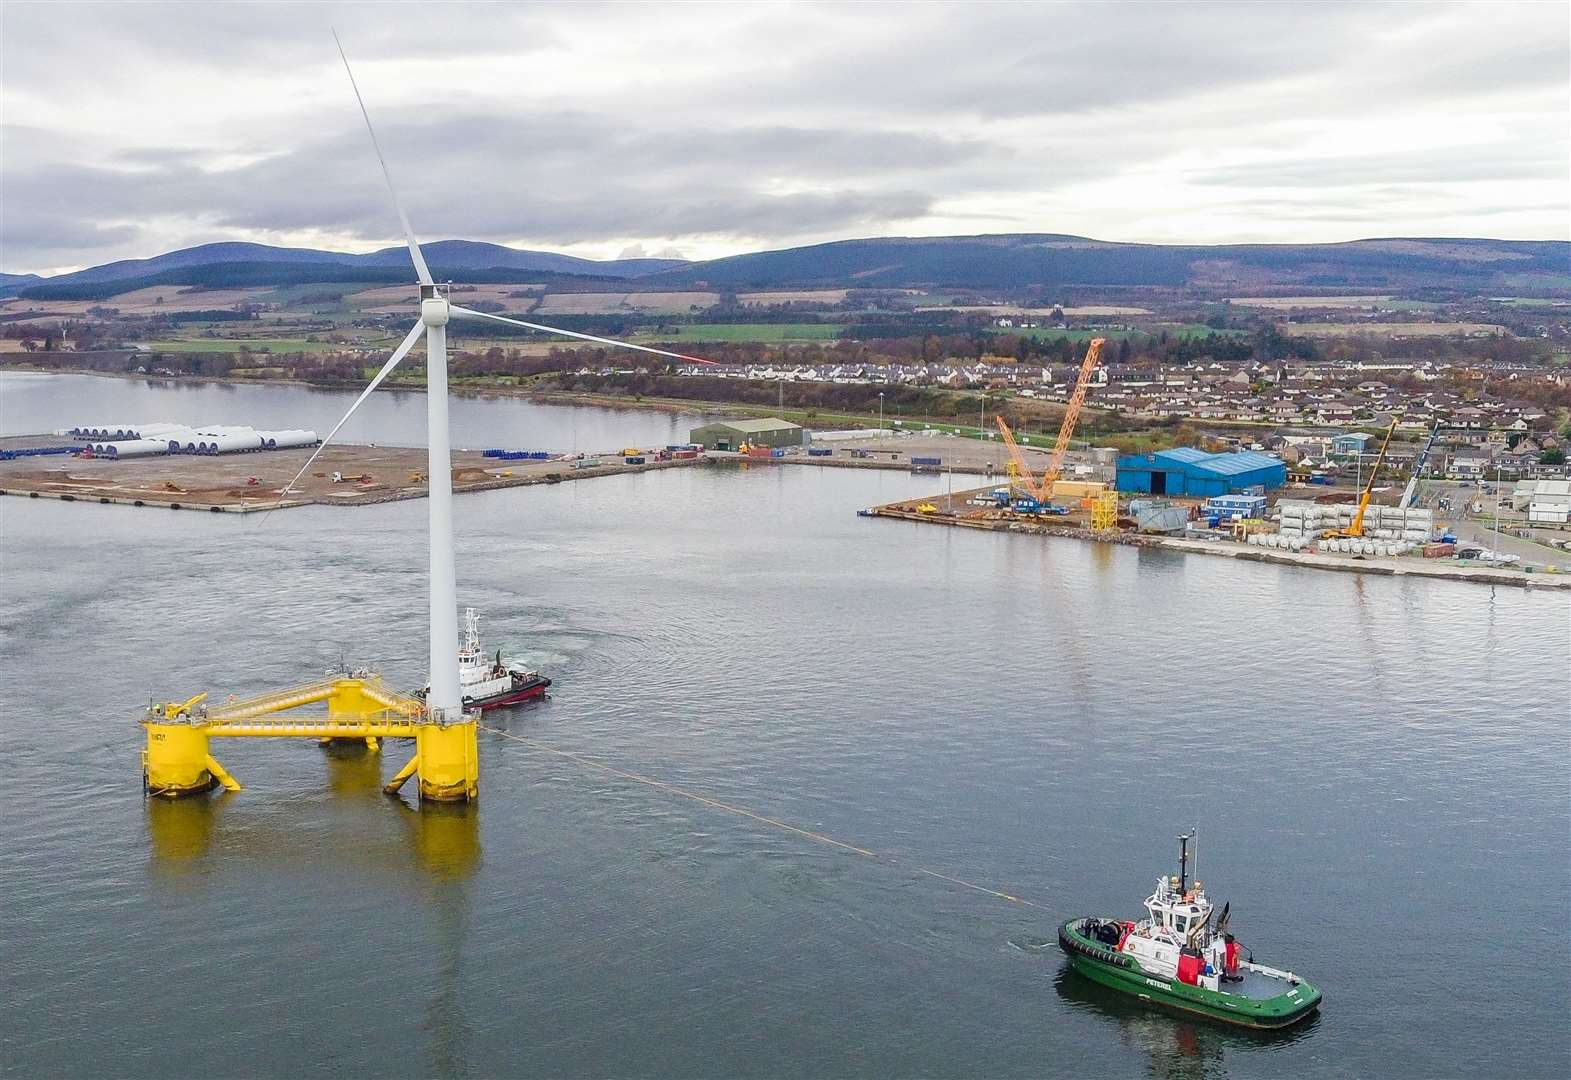 Port of Cromarty Firth. Image by: Malcolm McCurrach